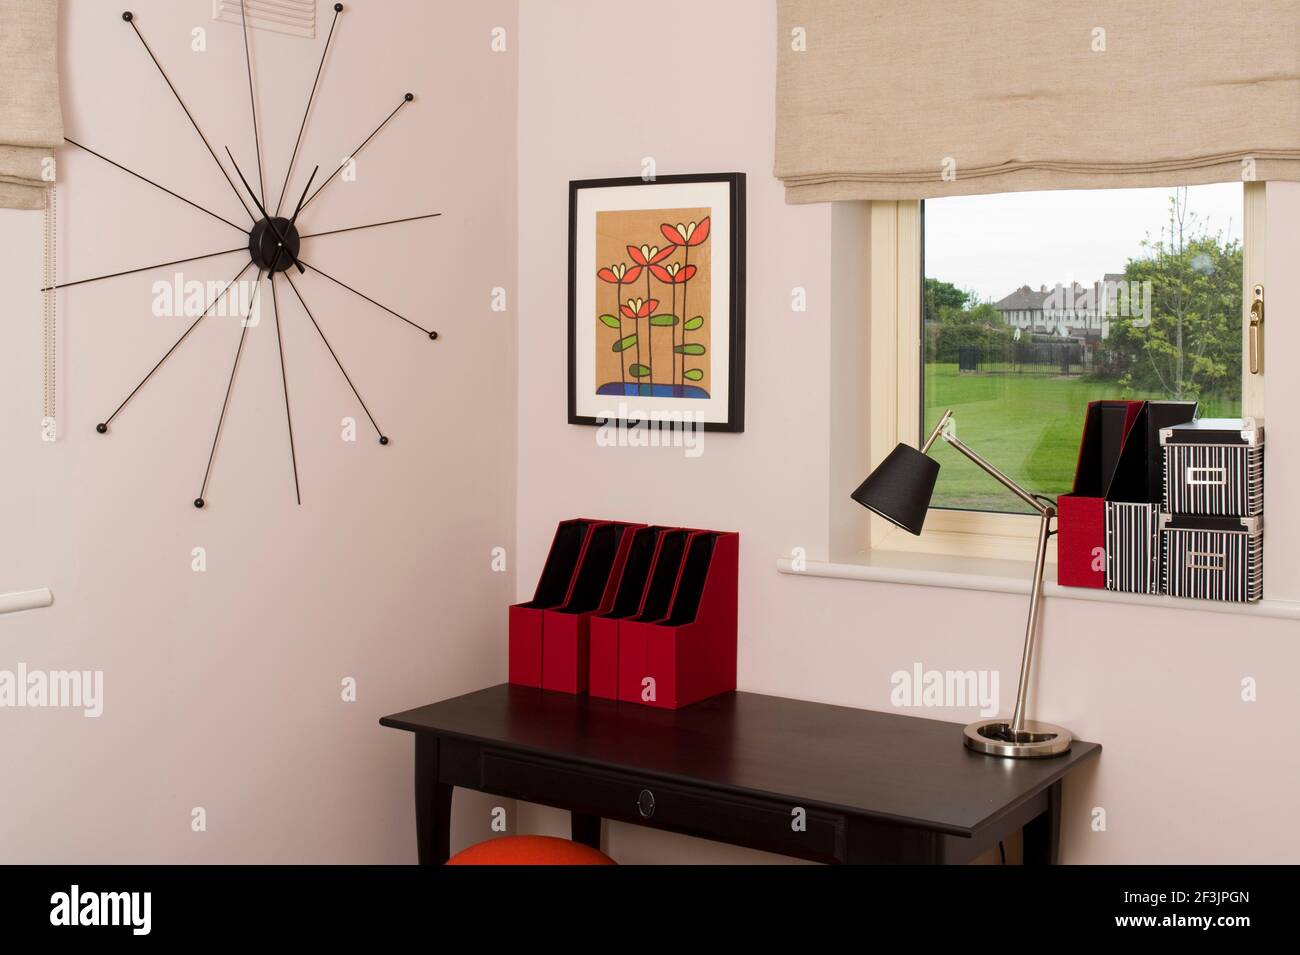 Contemporary wall clock in bedroom with table and storage boxes Photo by Kevin Mcfeely Stock Photo